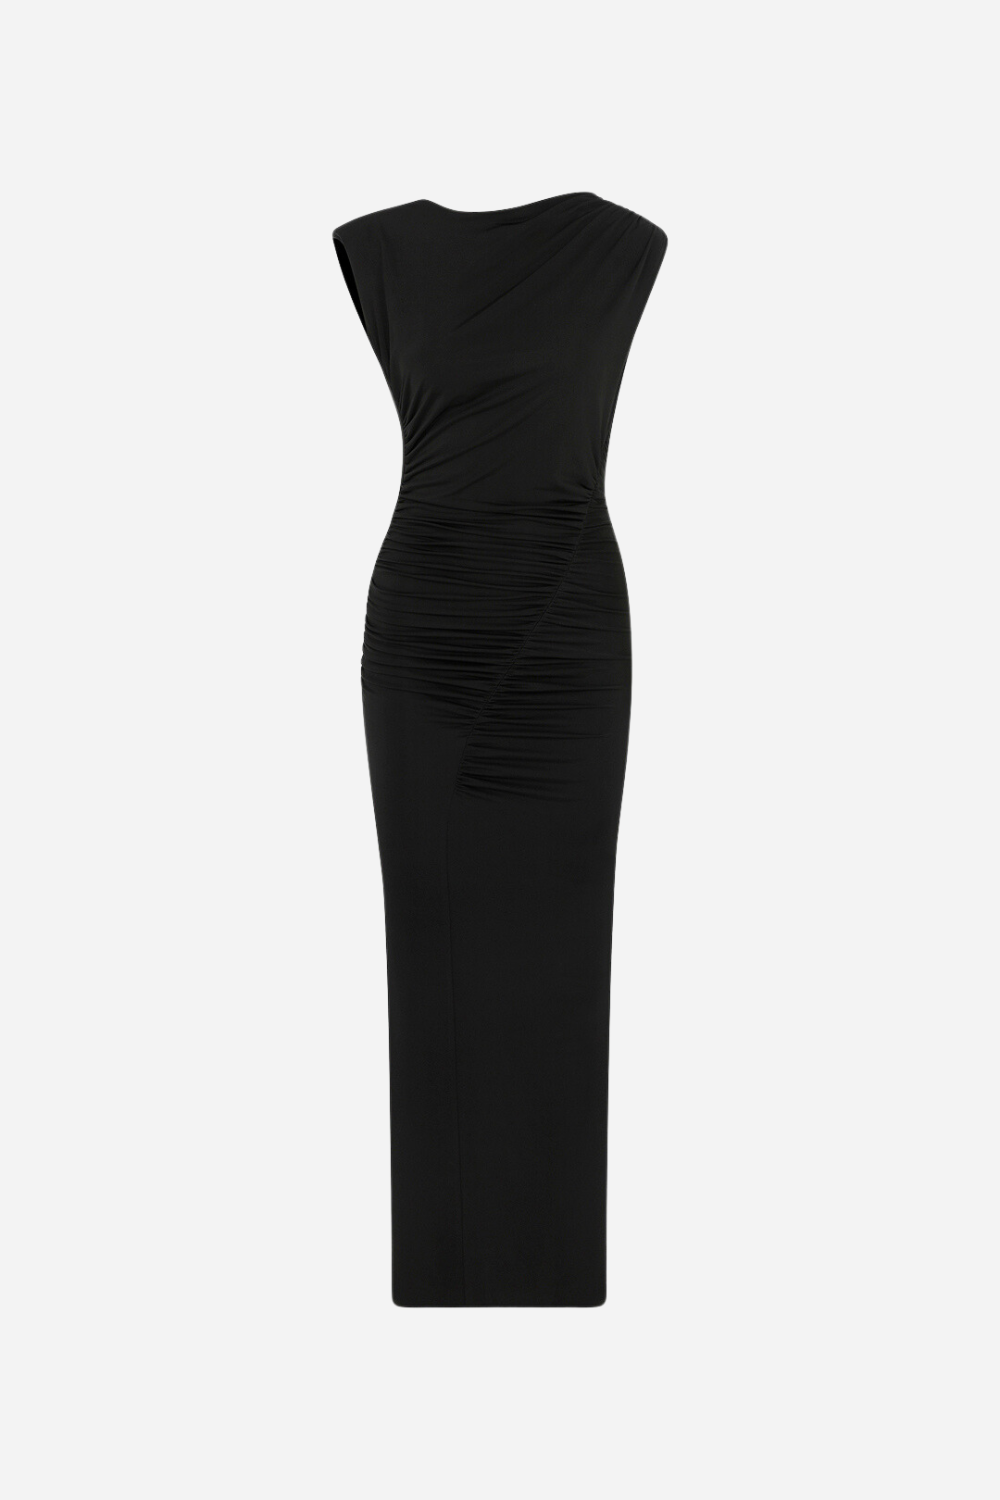 Maya - Jersey dress with back decolte in black